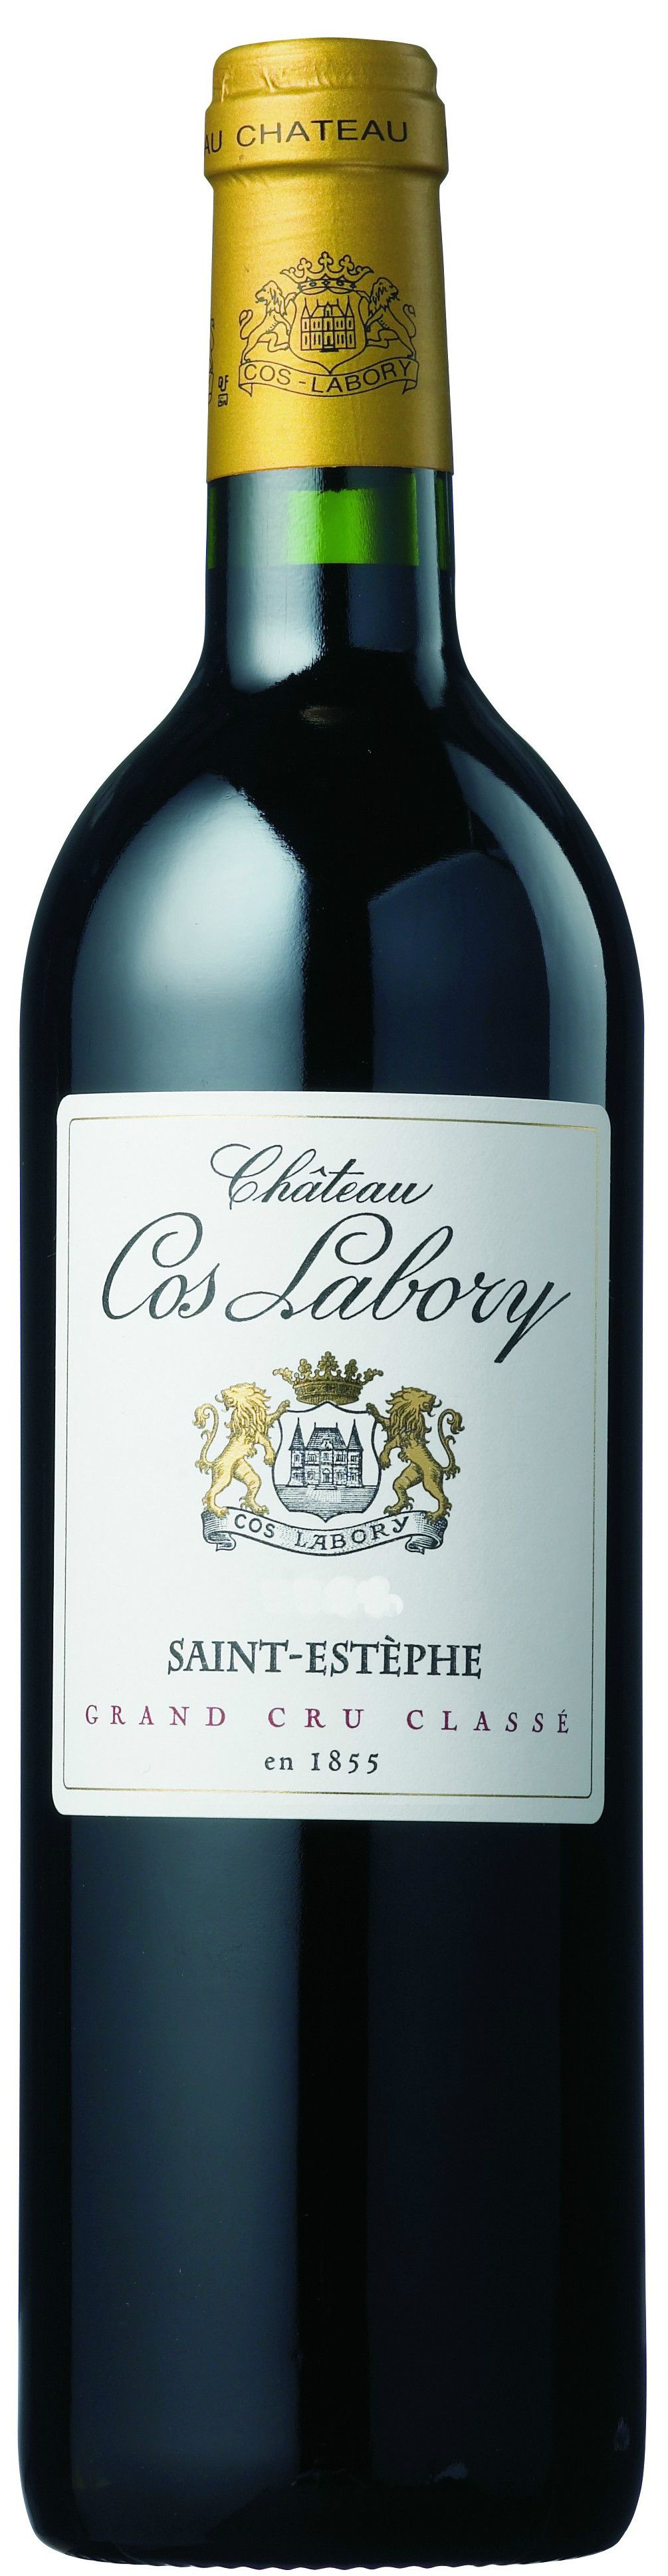 Chateau Cos Labory, 2010